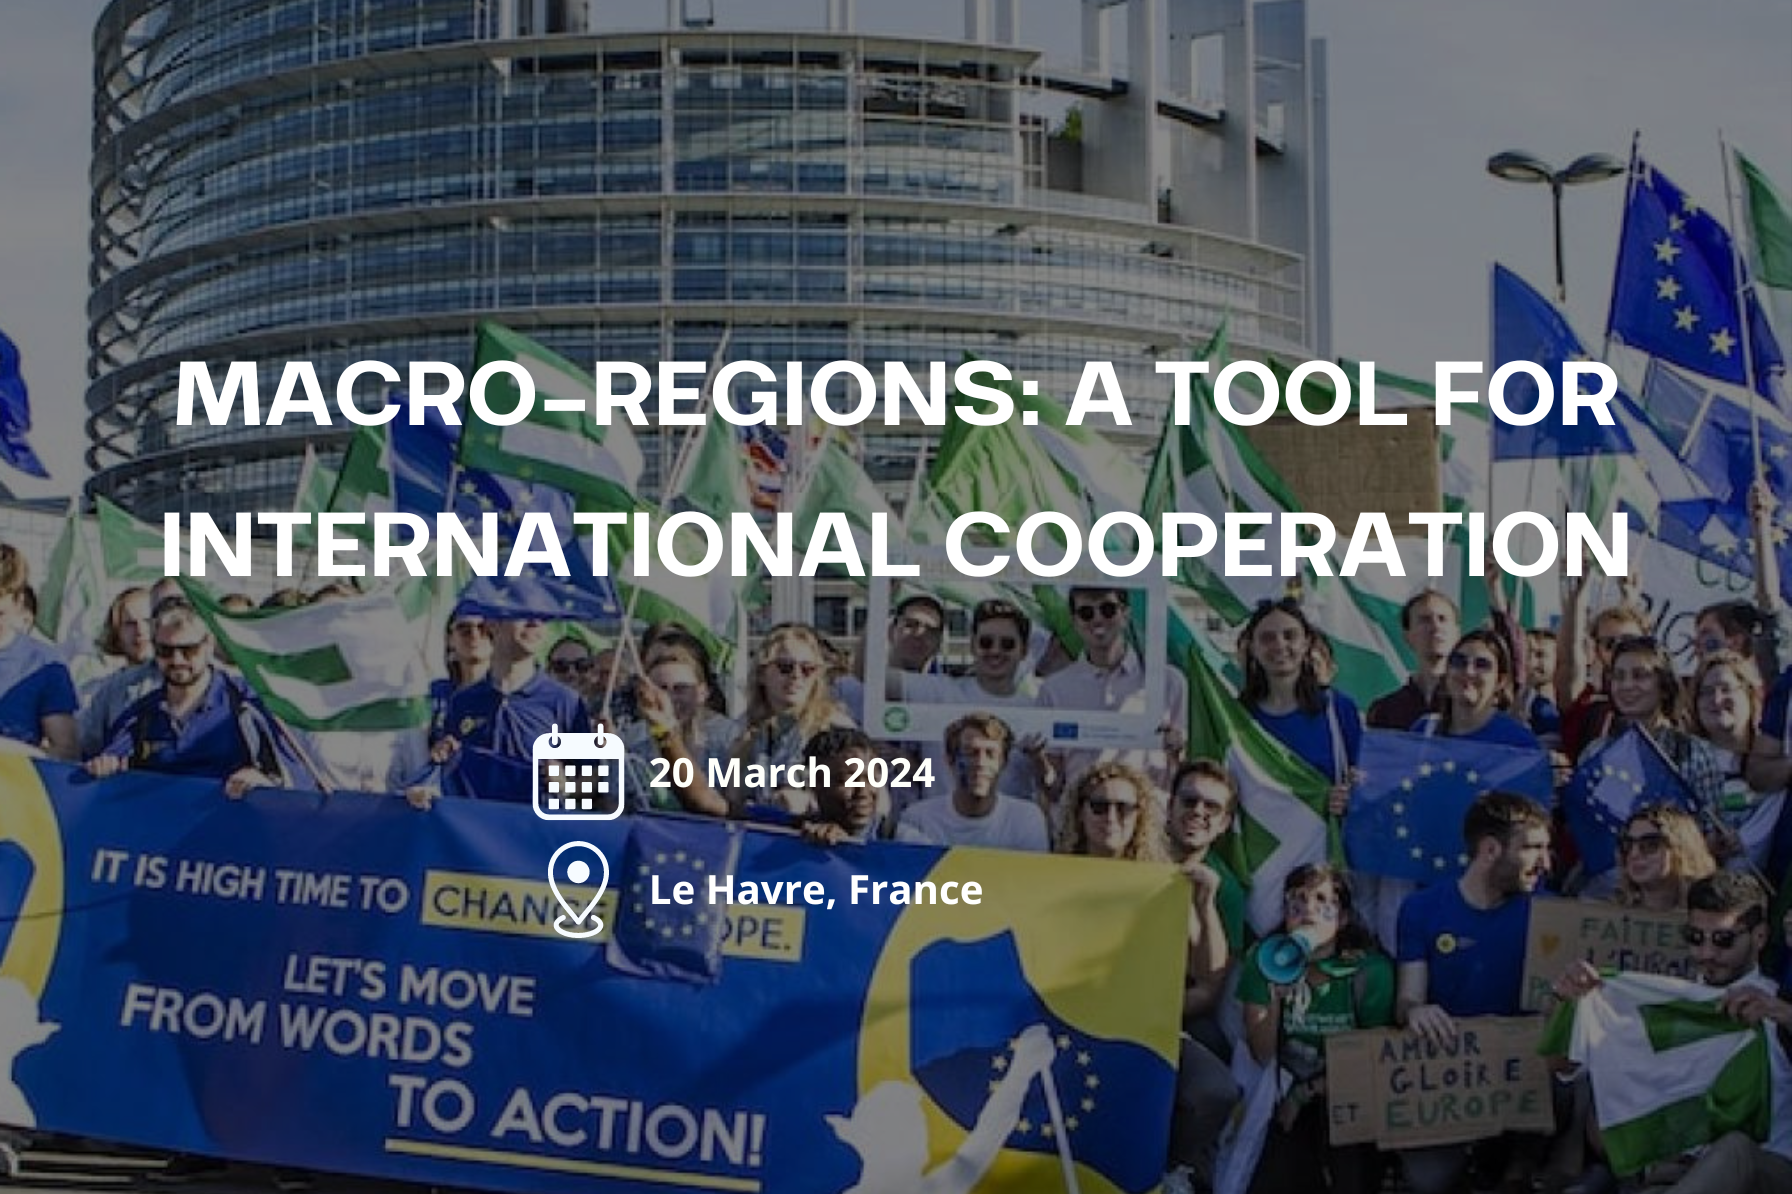 Macro-regions: a tool for international cooperation